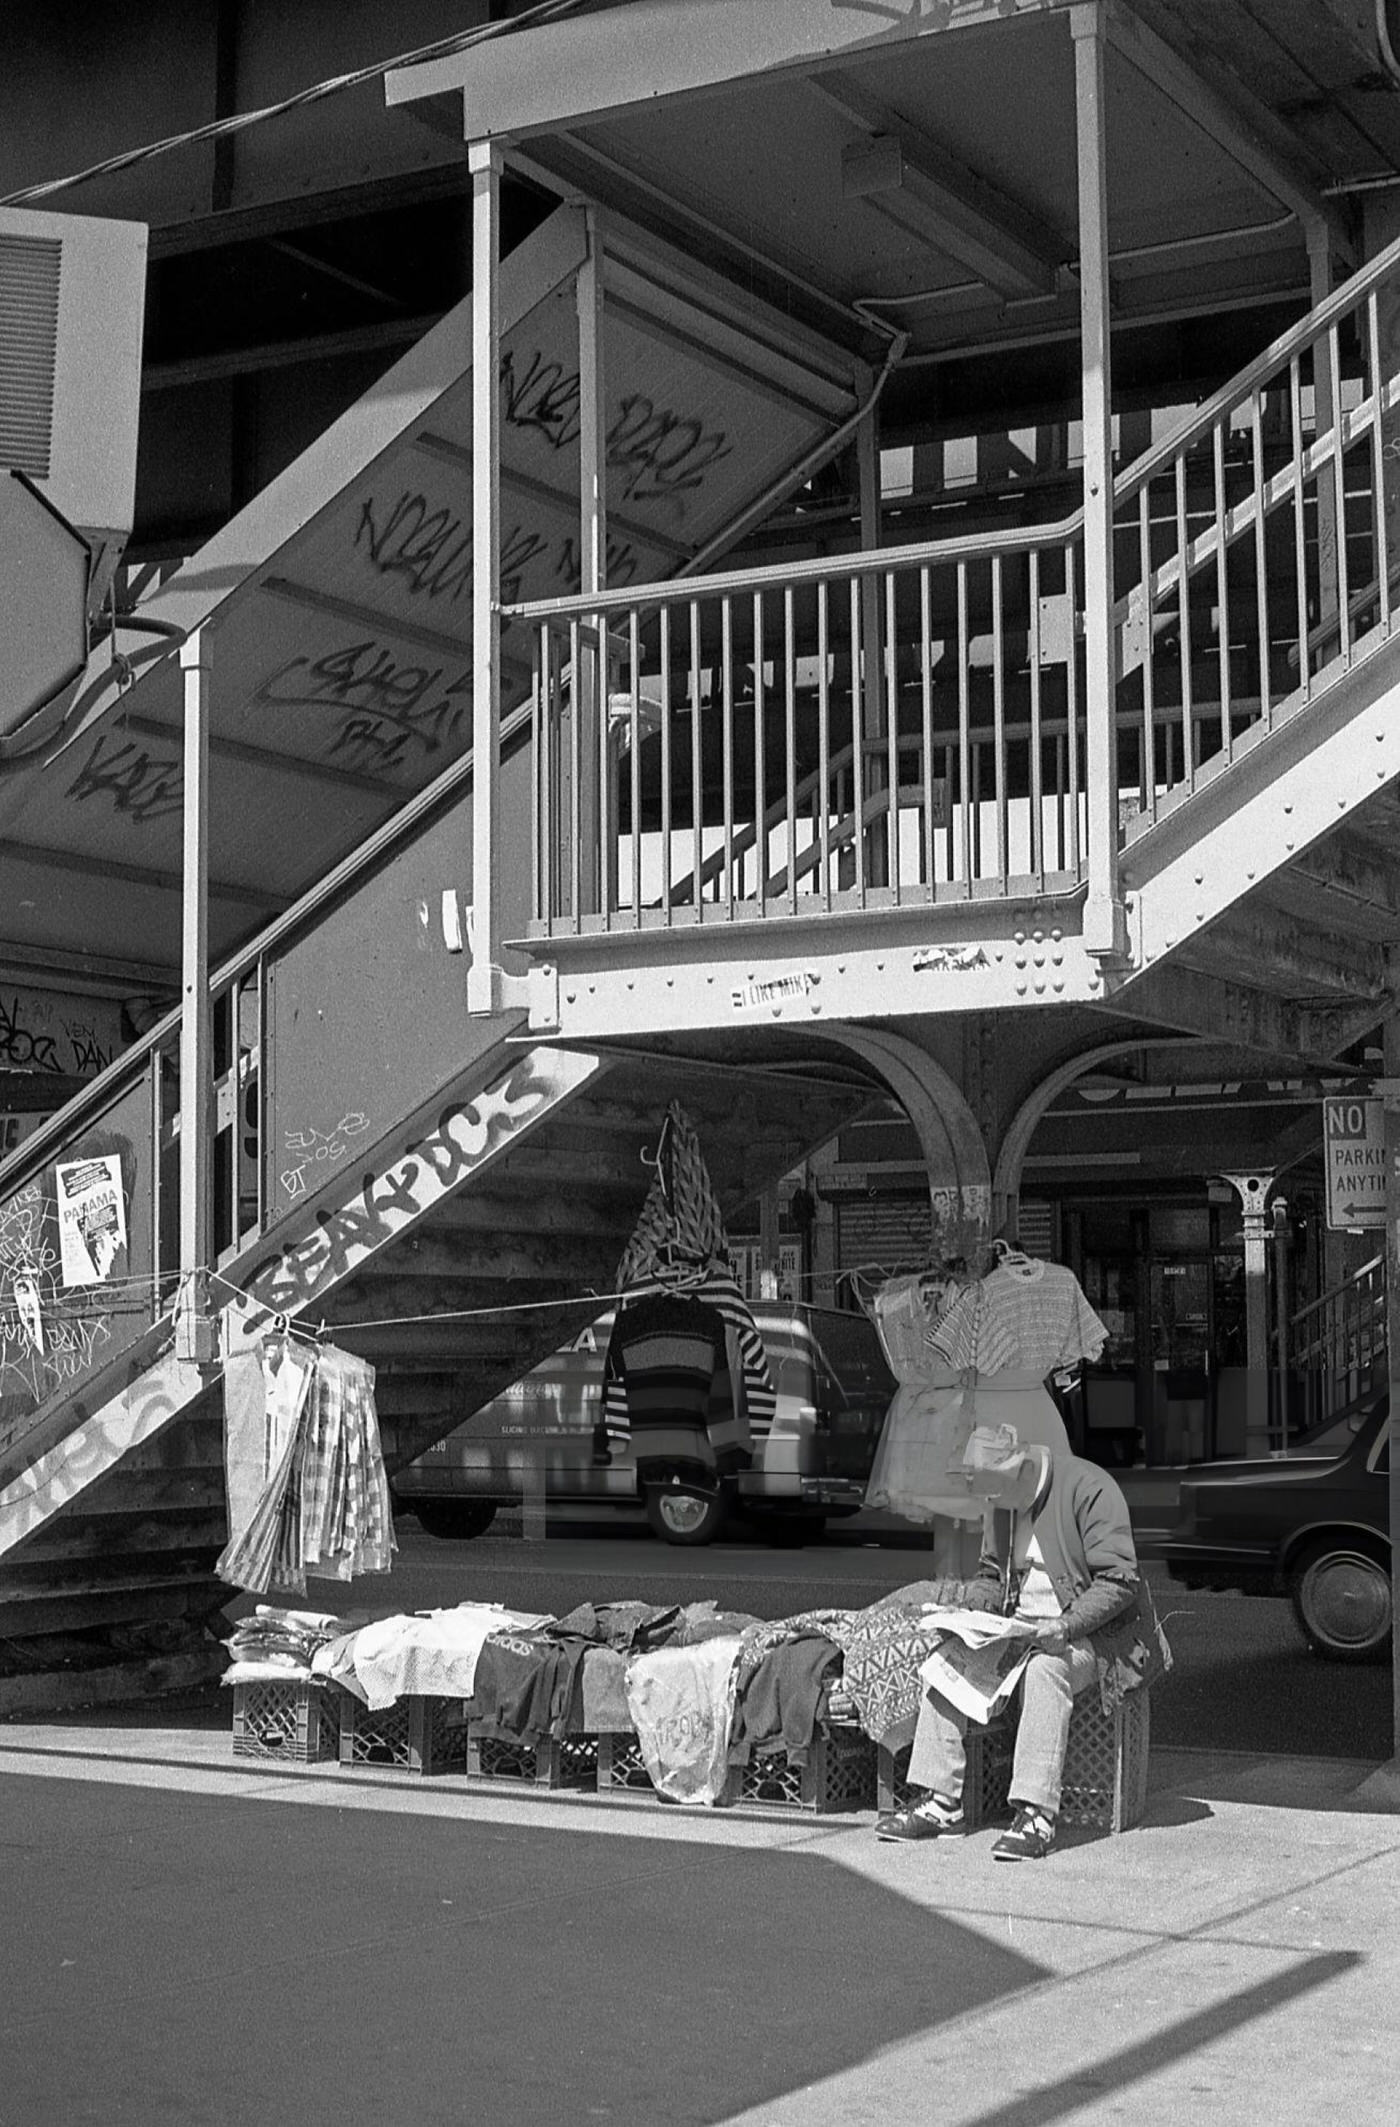 A Street Vendor Waits To Sell Clothing Next To The 103Rd Street Elevated Subway Station In Corona, Queens, 1990S.